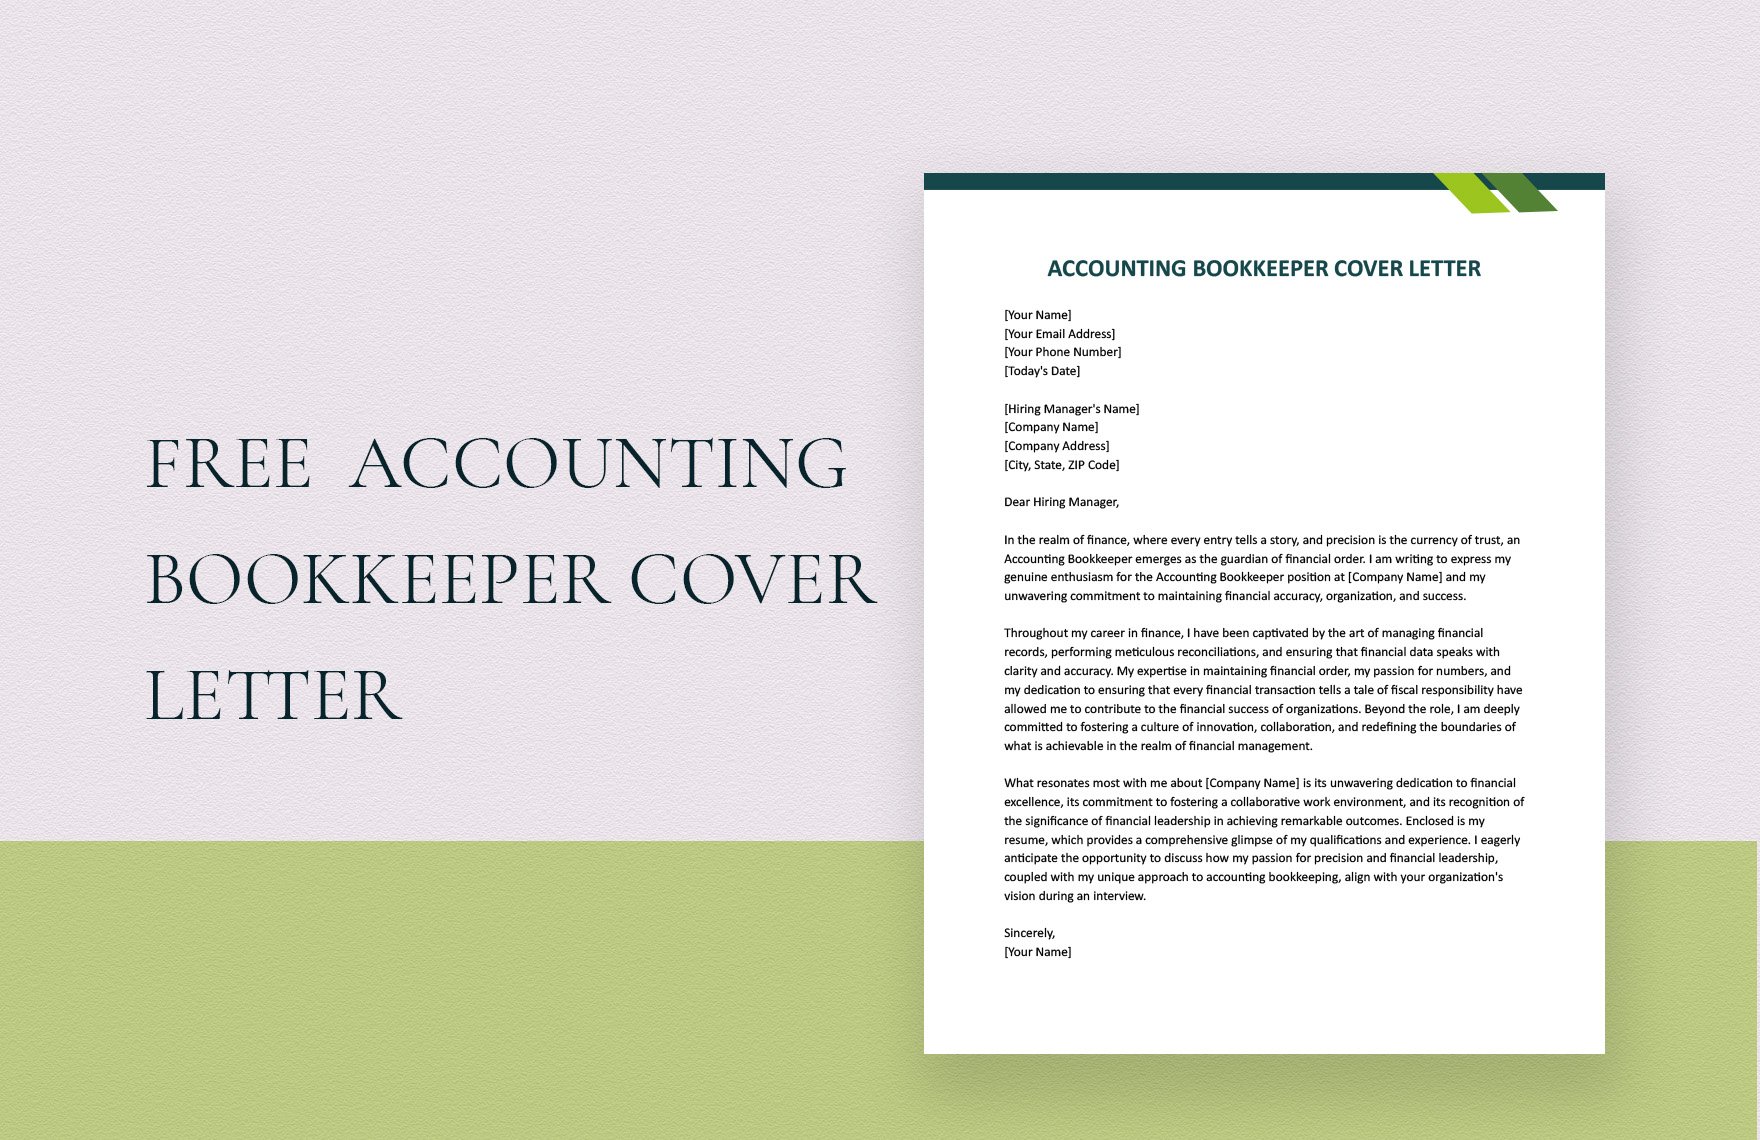 Accounting Bookkeeper Cover Letter